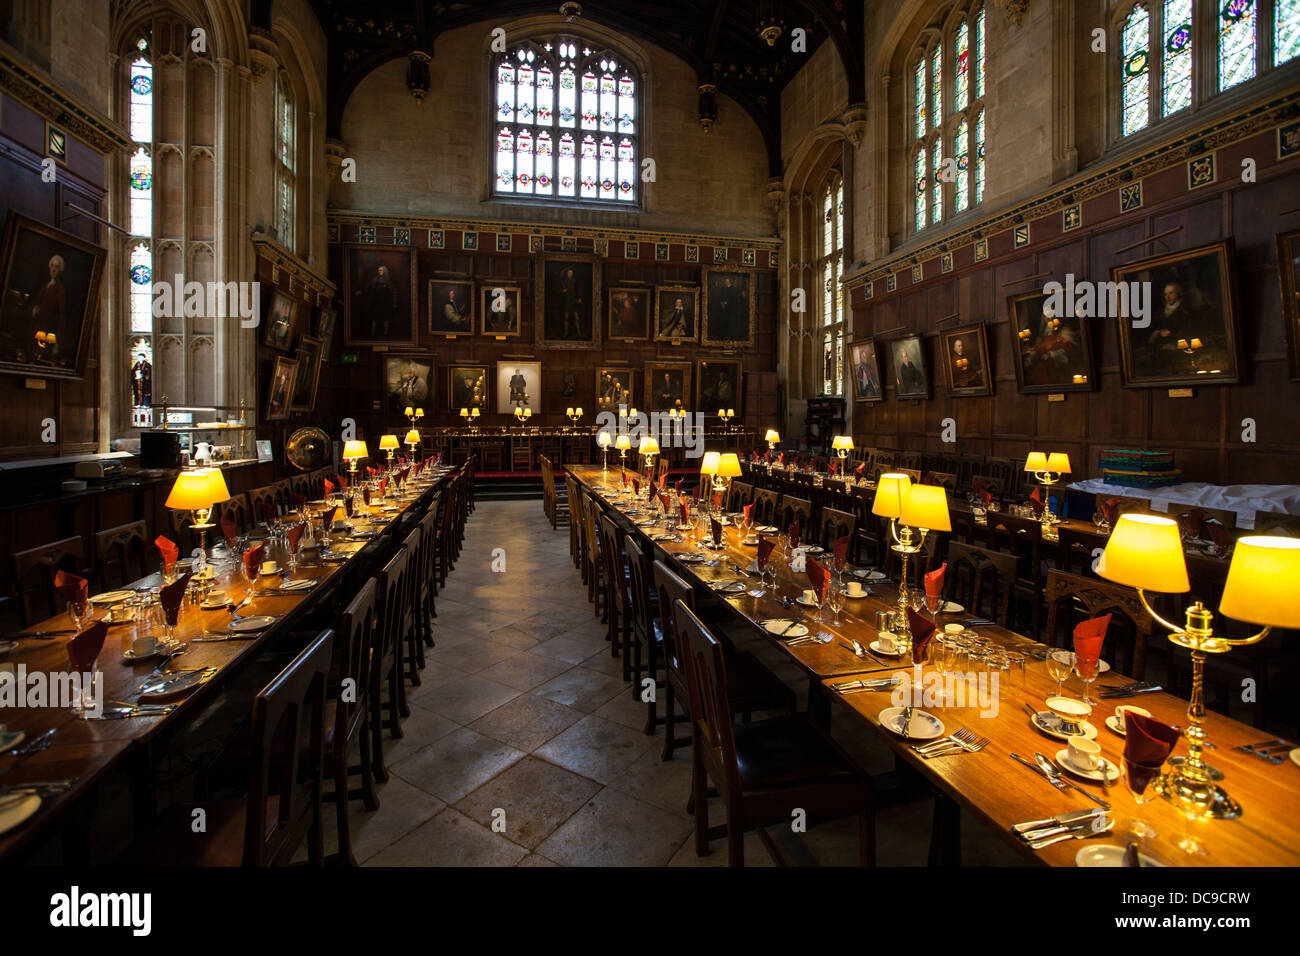 The dining hall at Christ Church College, Oxford University, England Stock Photo